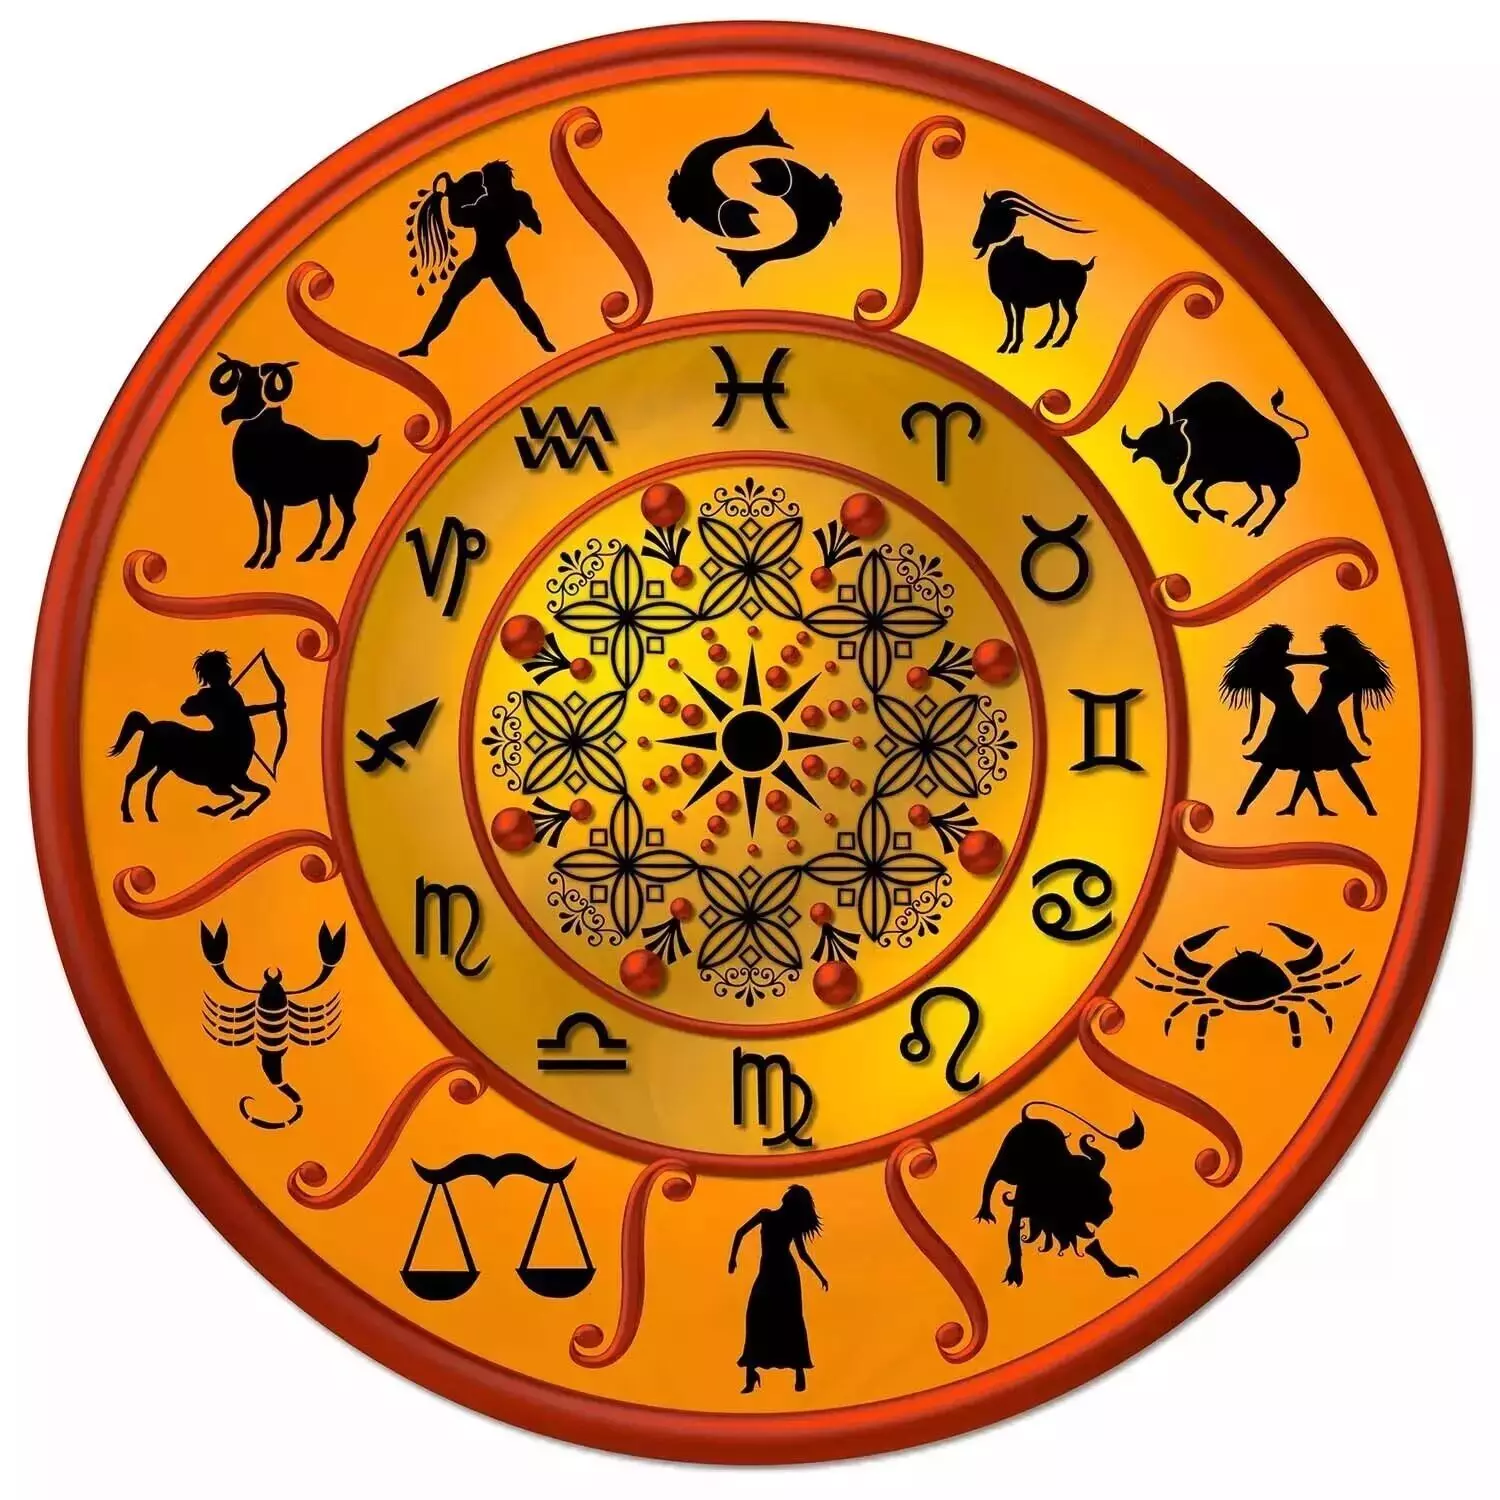 27 August  – Know your todays horoscope